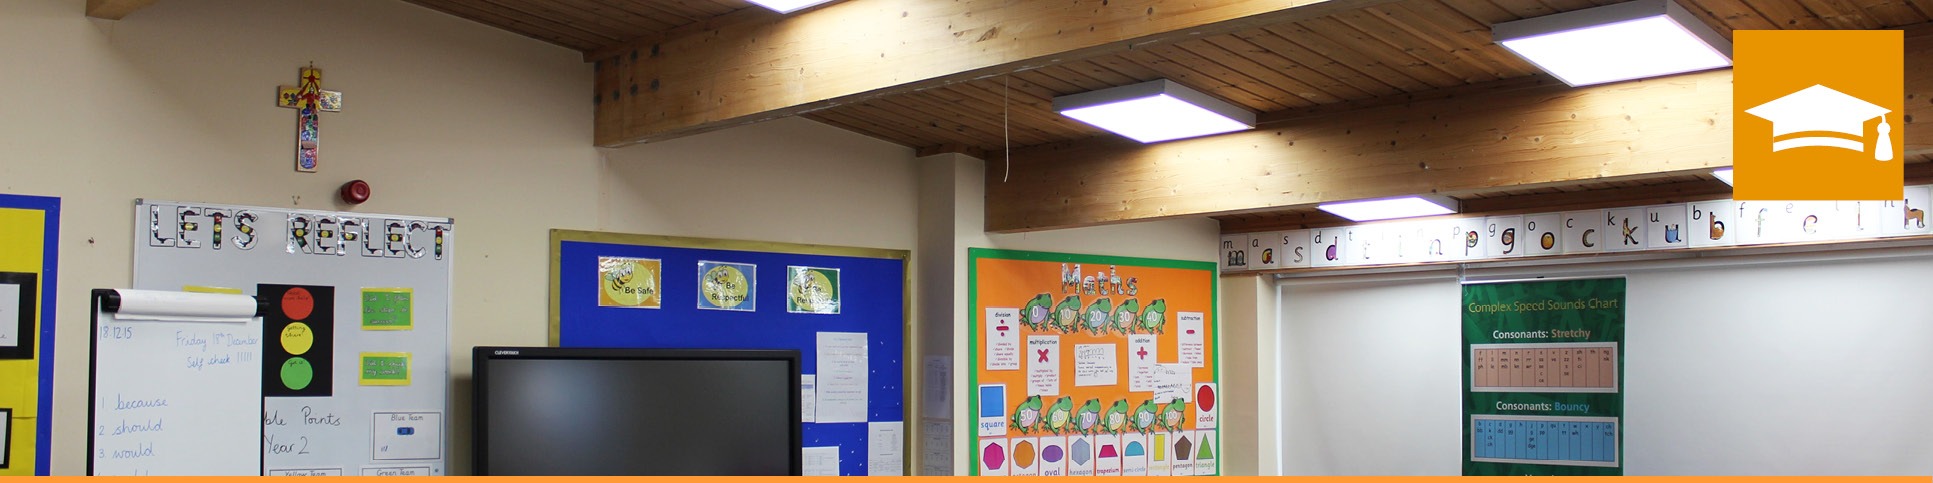 Tamlite Education classrooms LED lighting header with icon